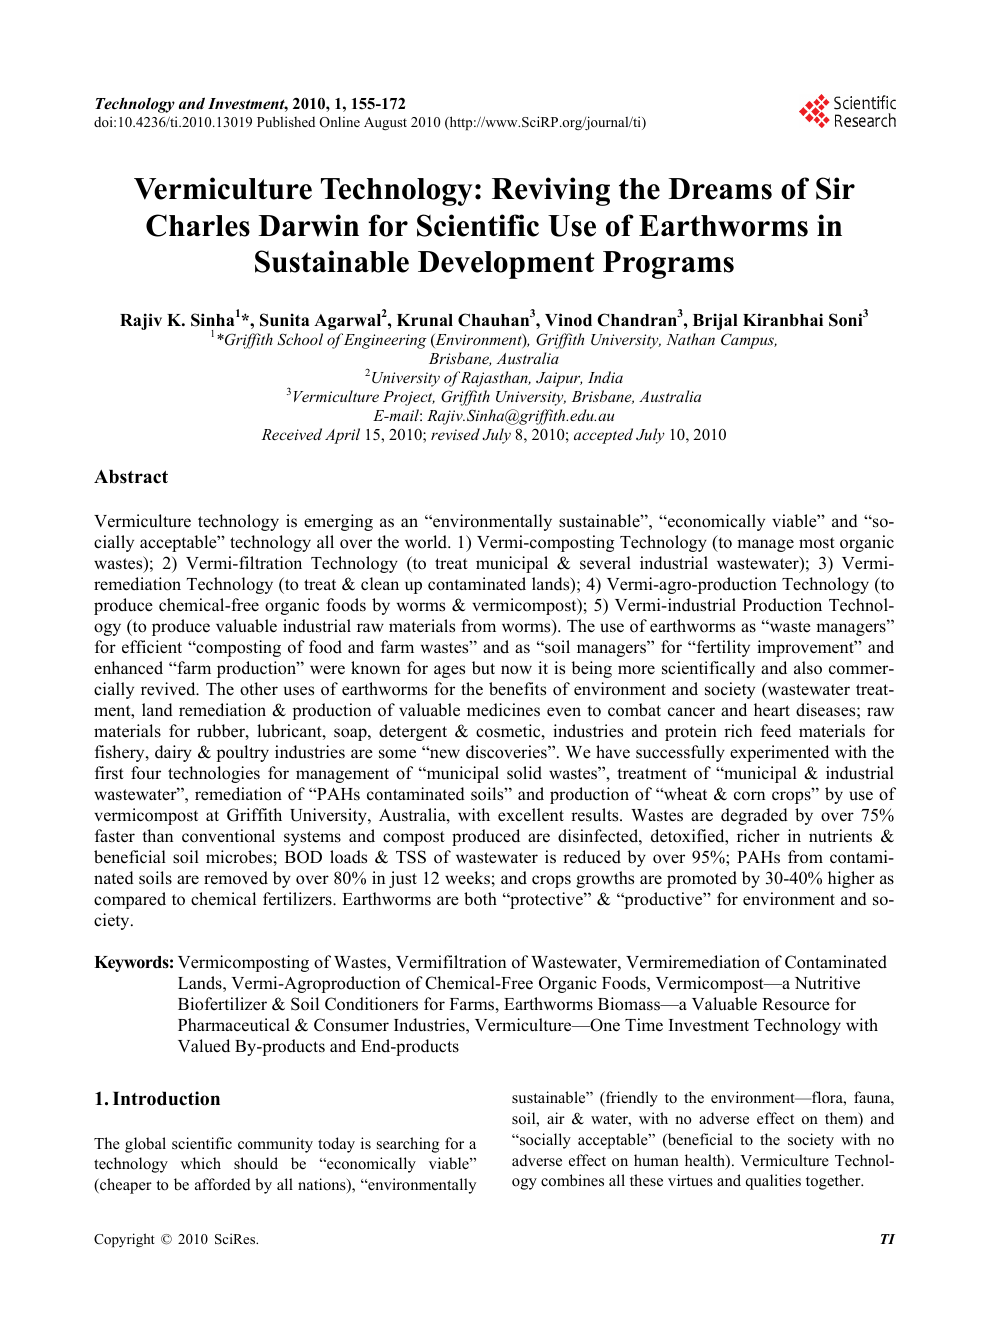 Vermiculture Technology Reviving The Dreams Of Sir Charles Darwin For Scientific Use Of Earthworms In Sustainable Development Programs Topic Of Research Paper In Agricultural Biotechnology Download Scholarly Article Pdf And Read